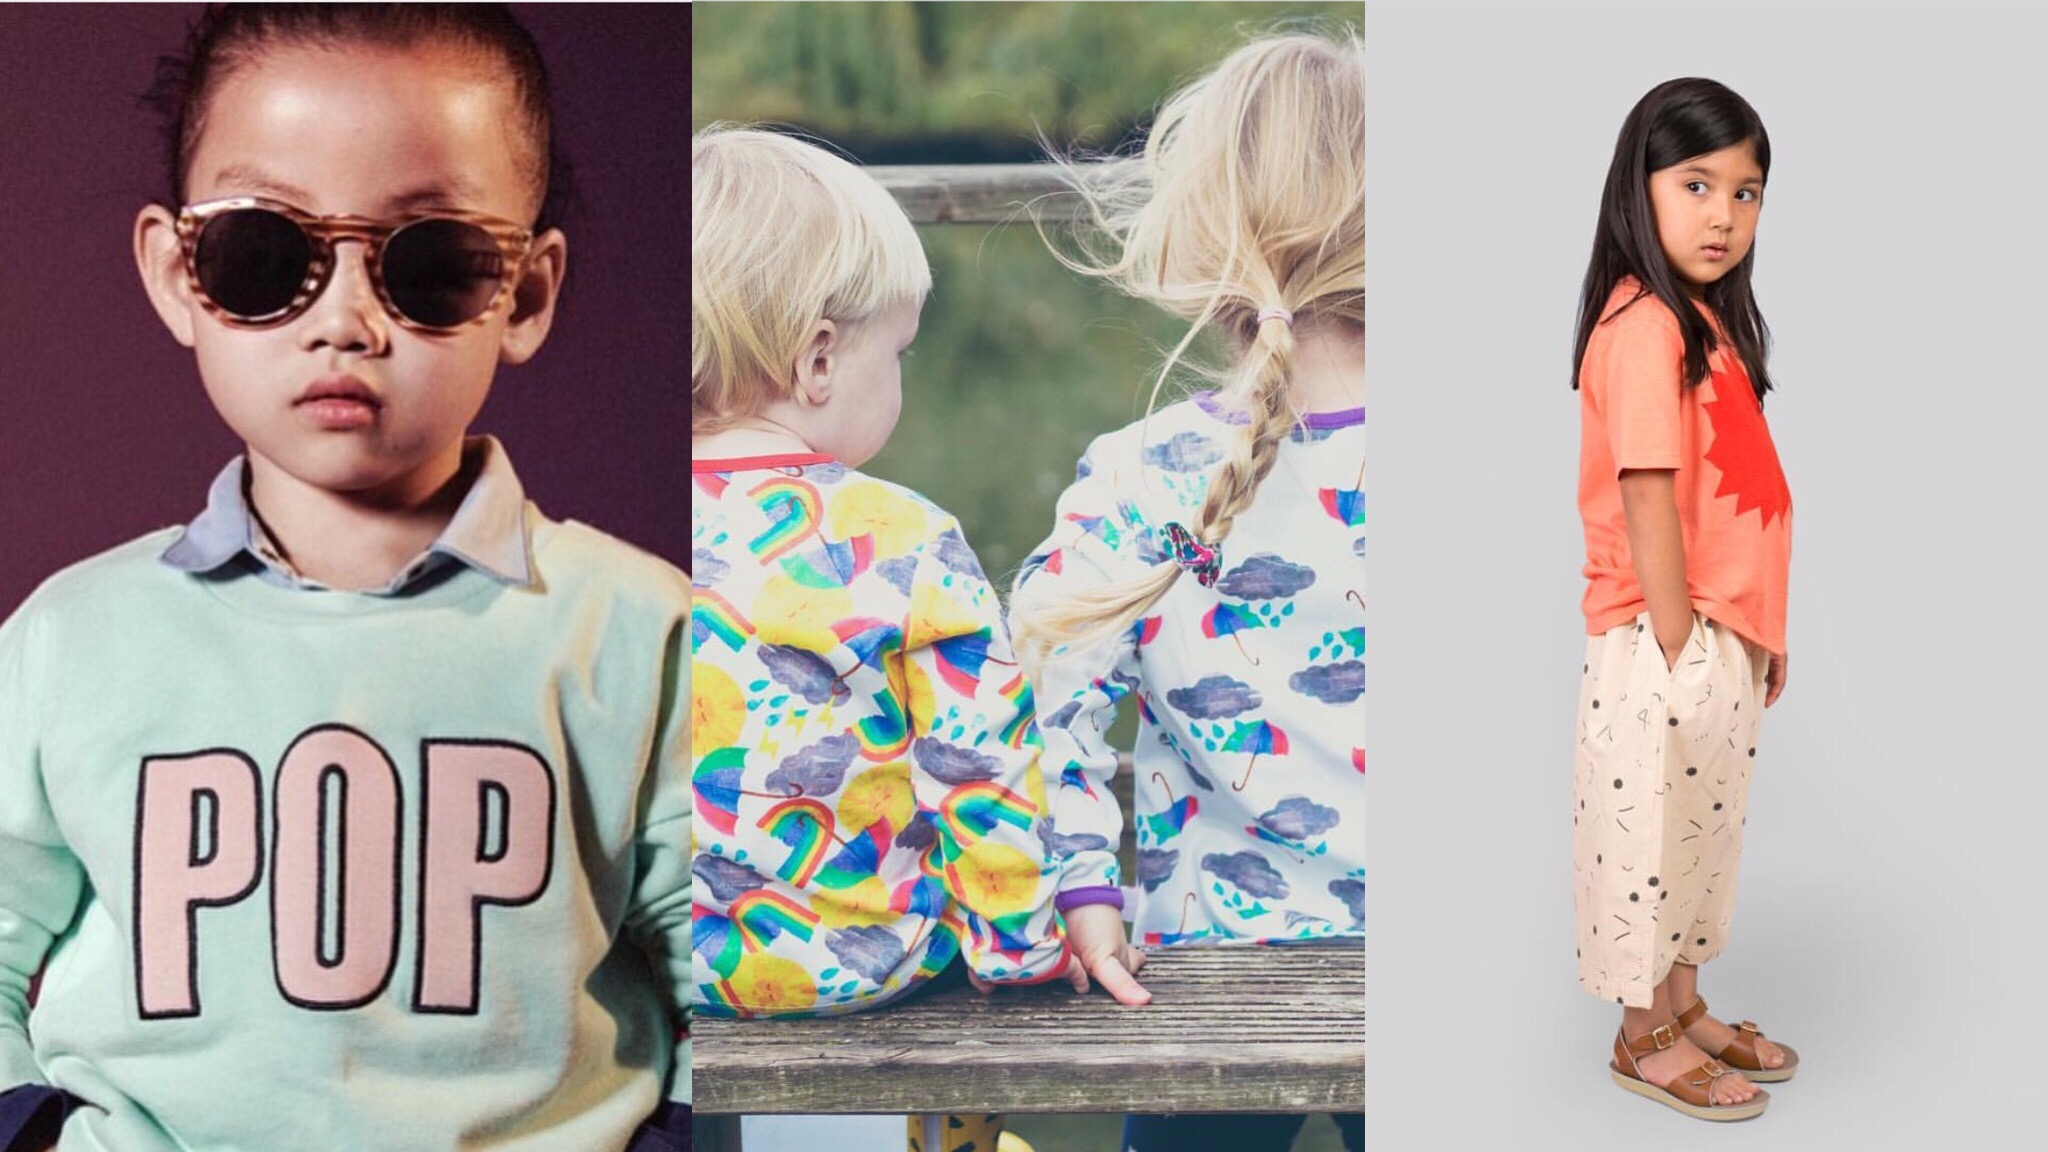 Six Places to Shop for Super Cute Gender-Neutral Kids Clothing